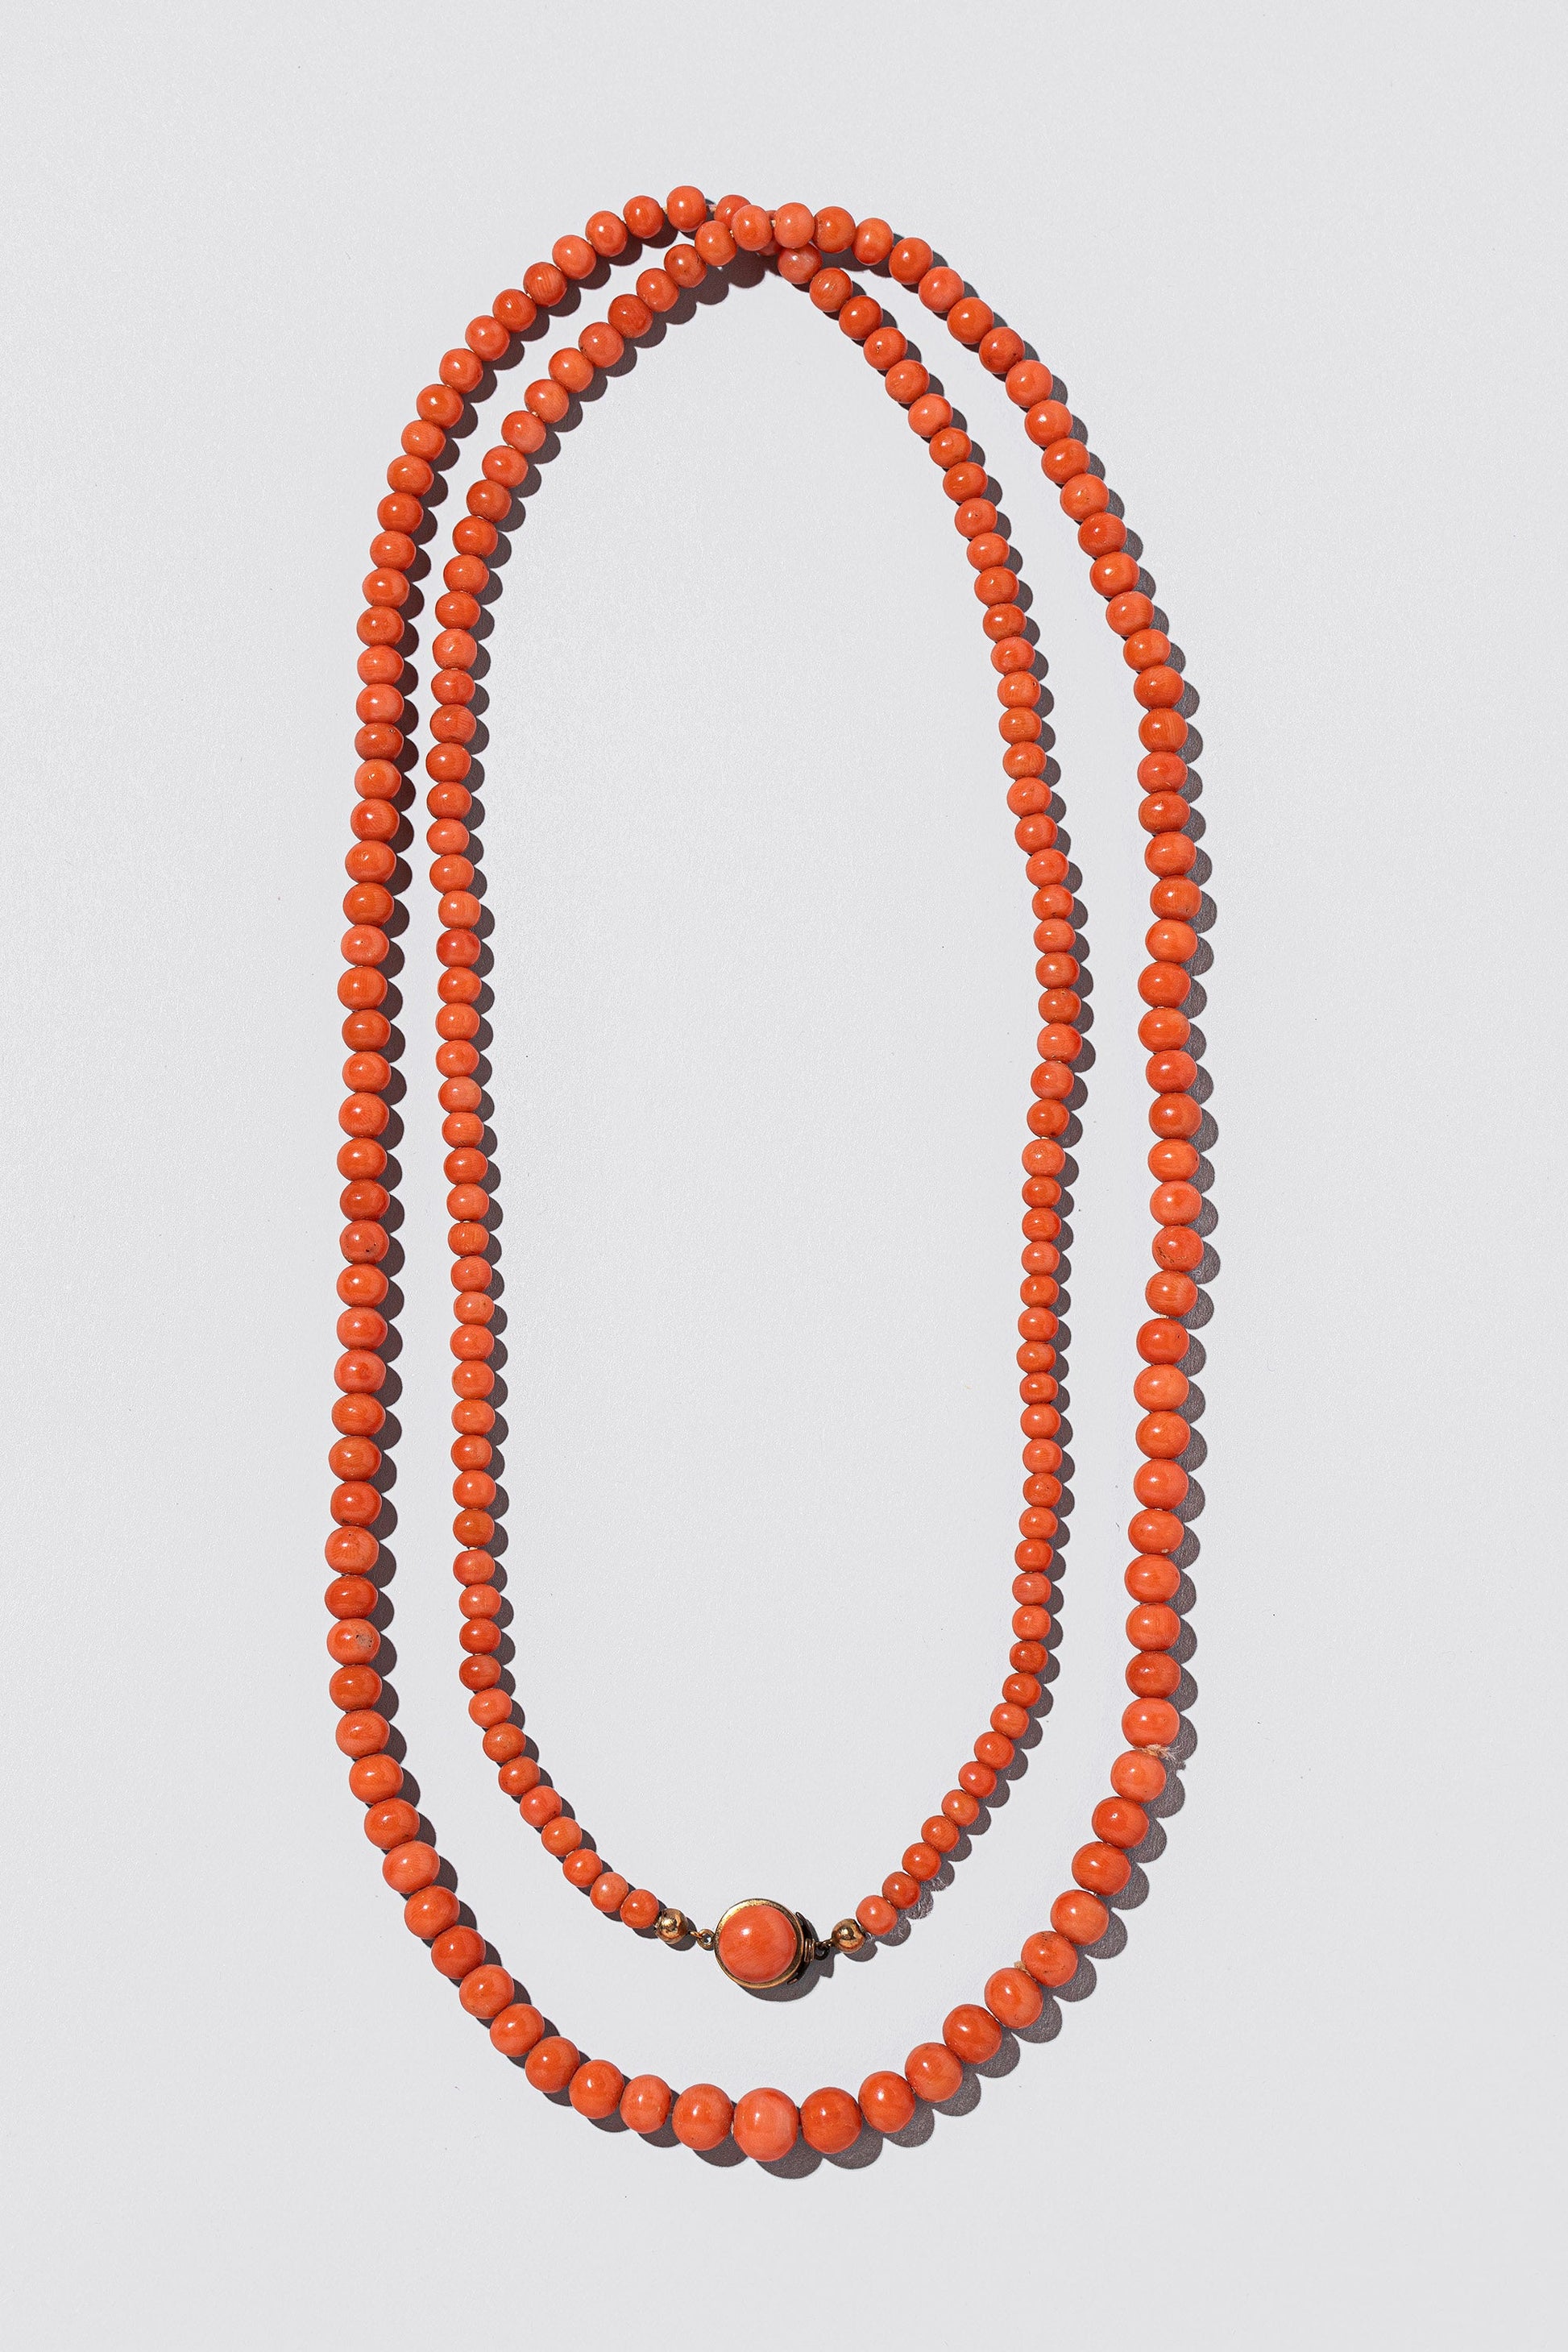  Coral Necklace on light color background.